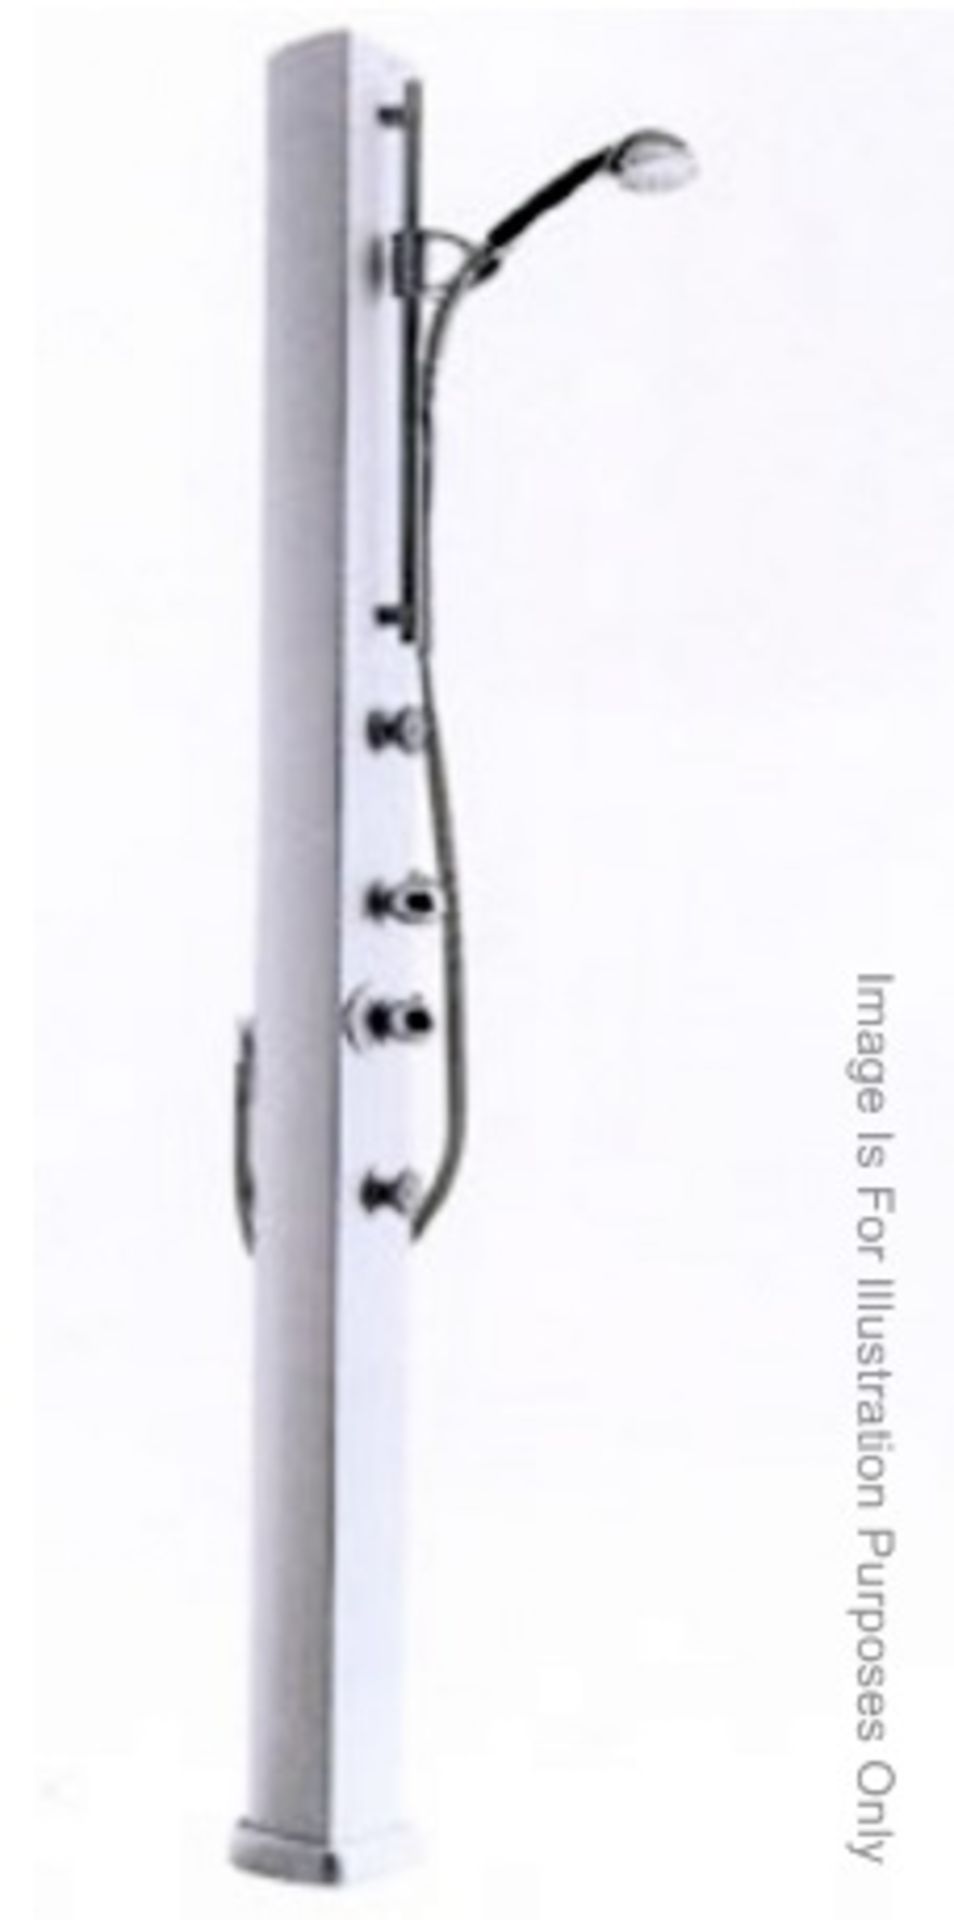 1 x Hansgrohe Pharo "Colonna Doccia" Upright Bathroom Shower Panel - Preowned In Good Condition -